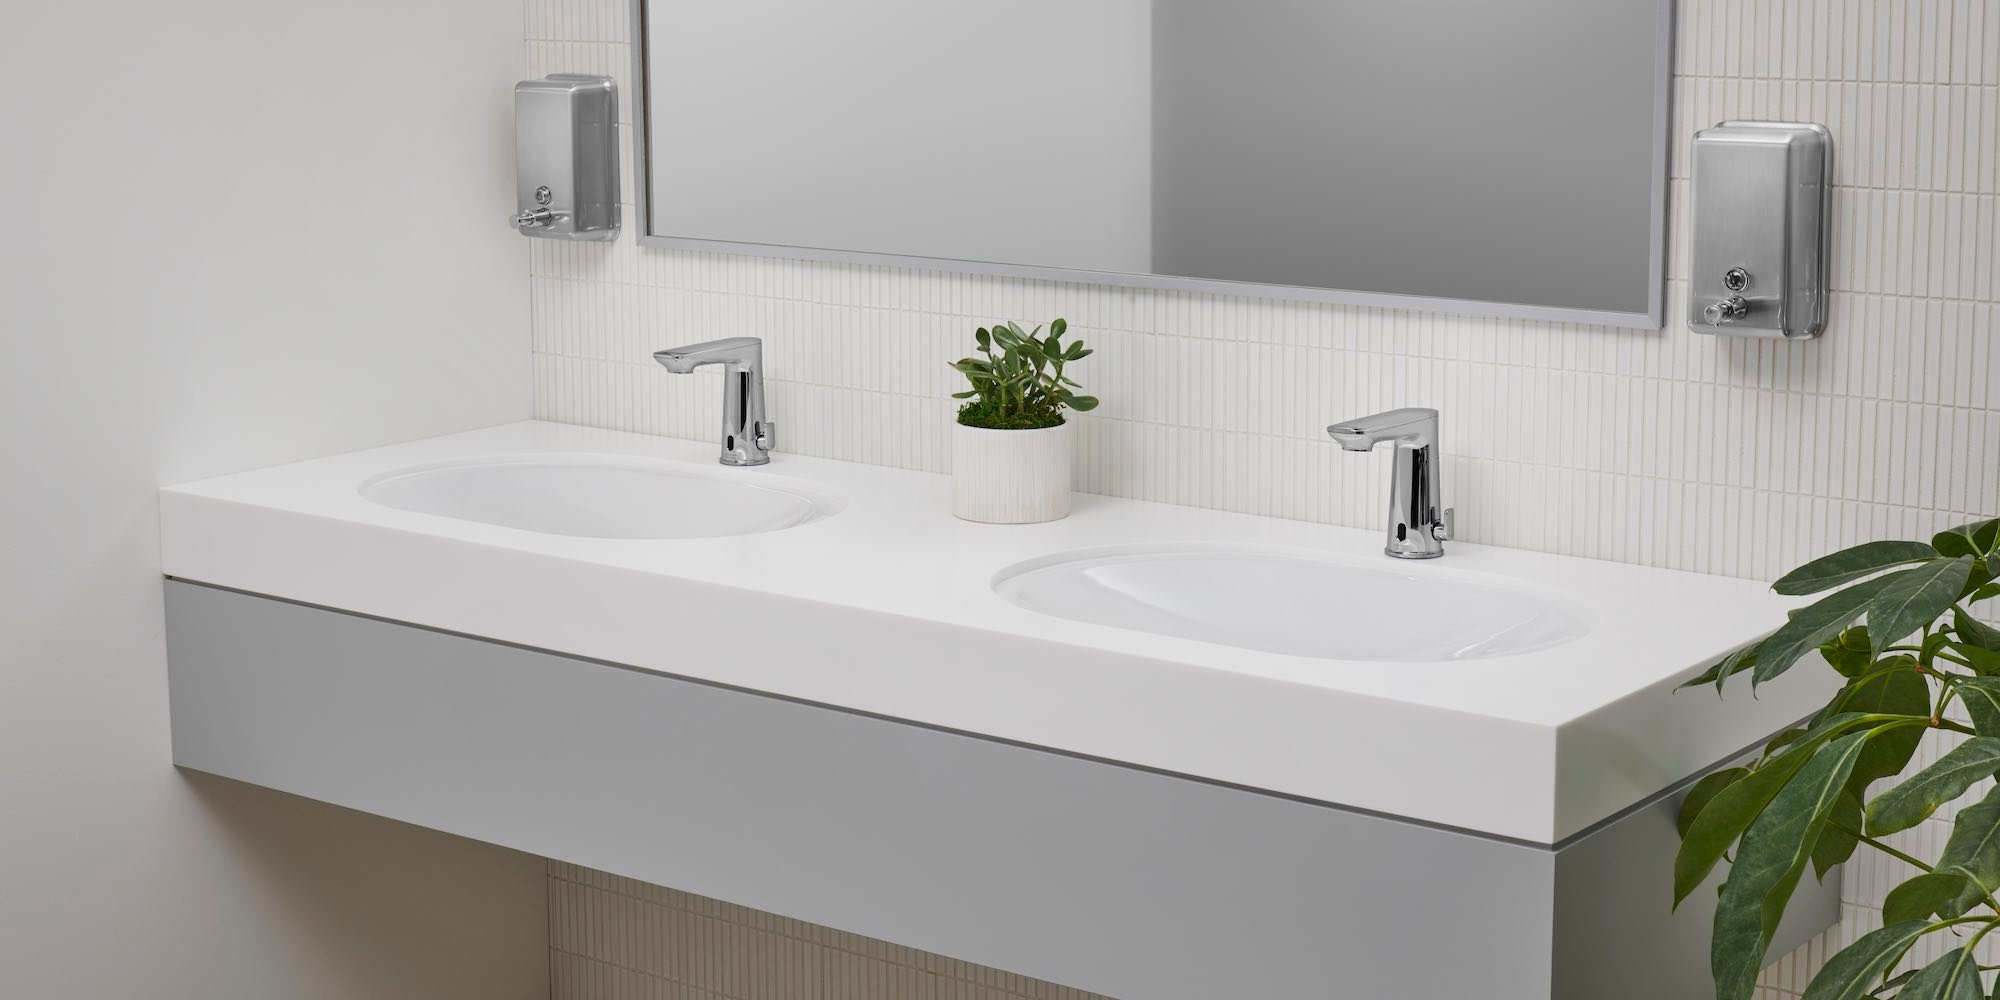 Grey touchless faucets